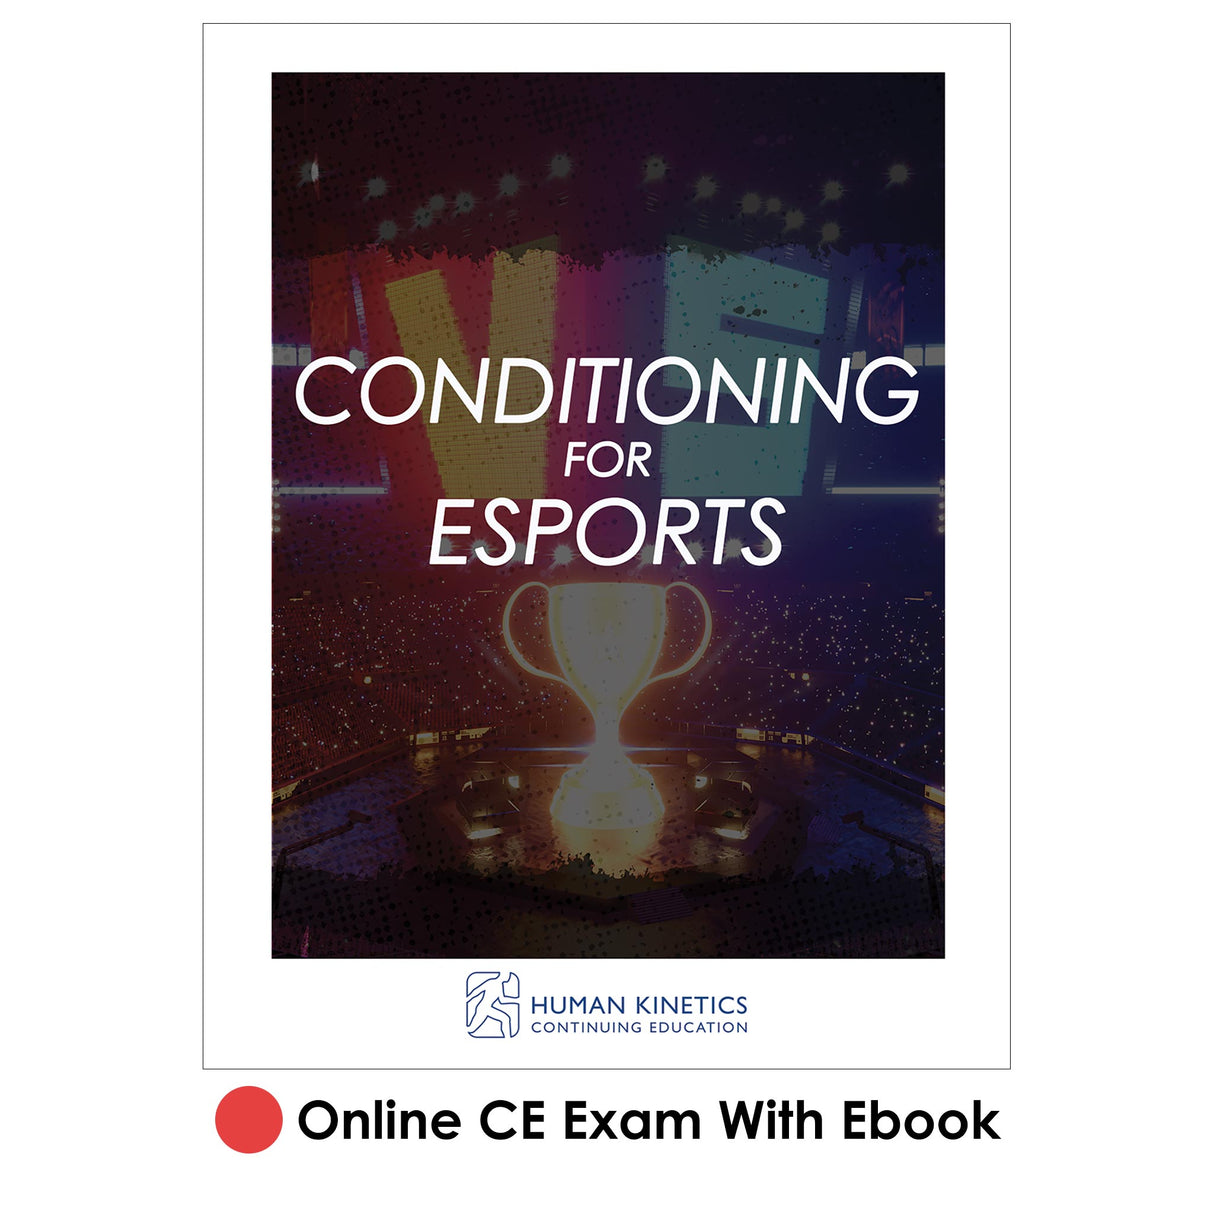 Conditioning for Esports Online CE Exam With Ebook